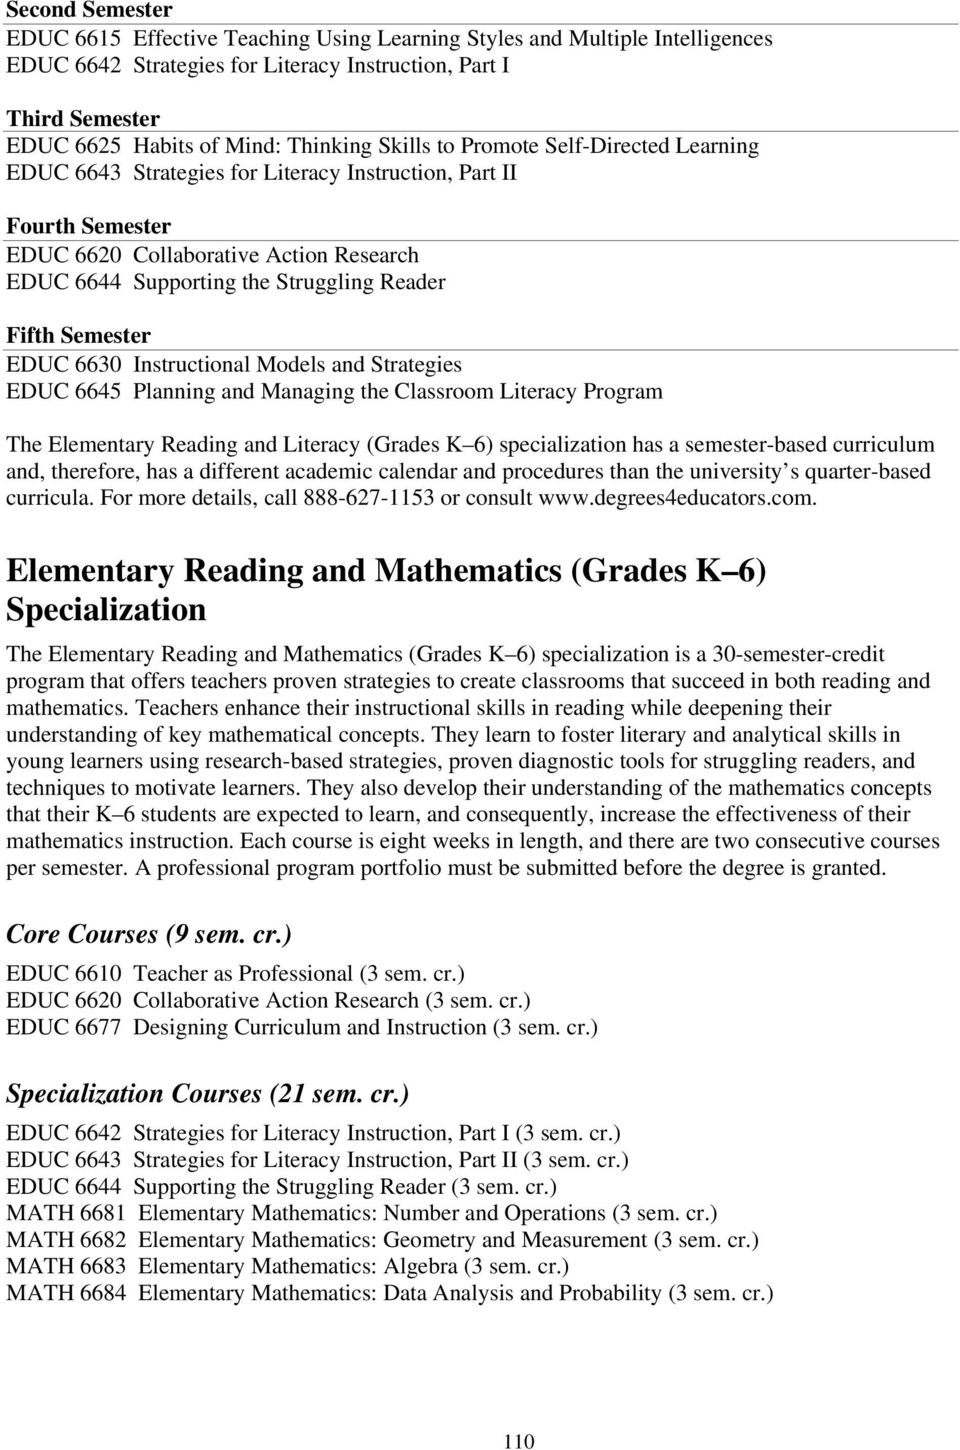 Fifth Semester EDUC 6630 Instructional Models and Strategies EDUC 6645 Planning and Managing the Classroom Literacy Program The Elementary Reading and Literacy (Grades K 6) specialization has a